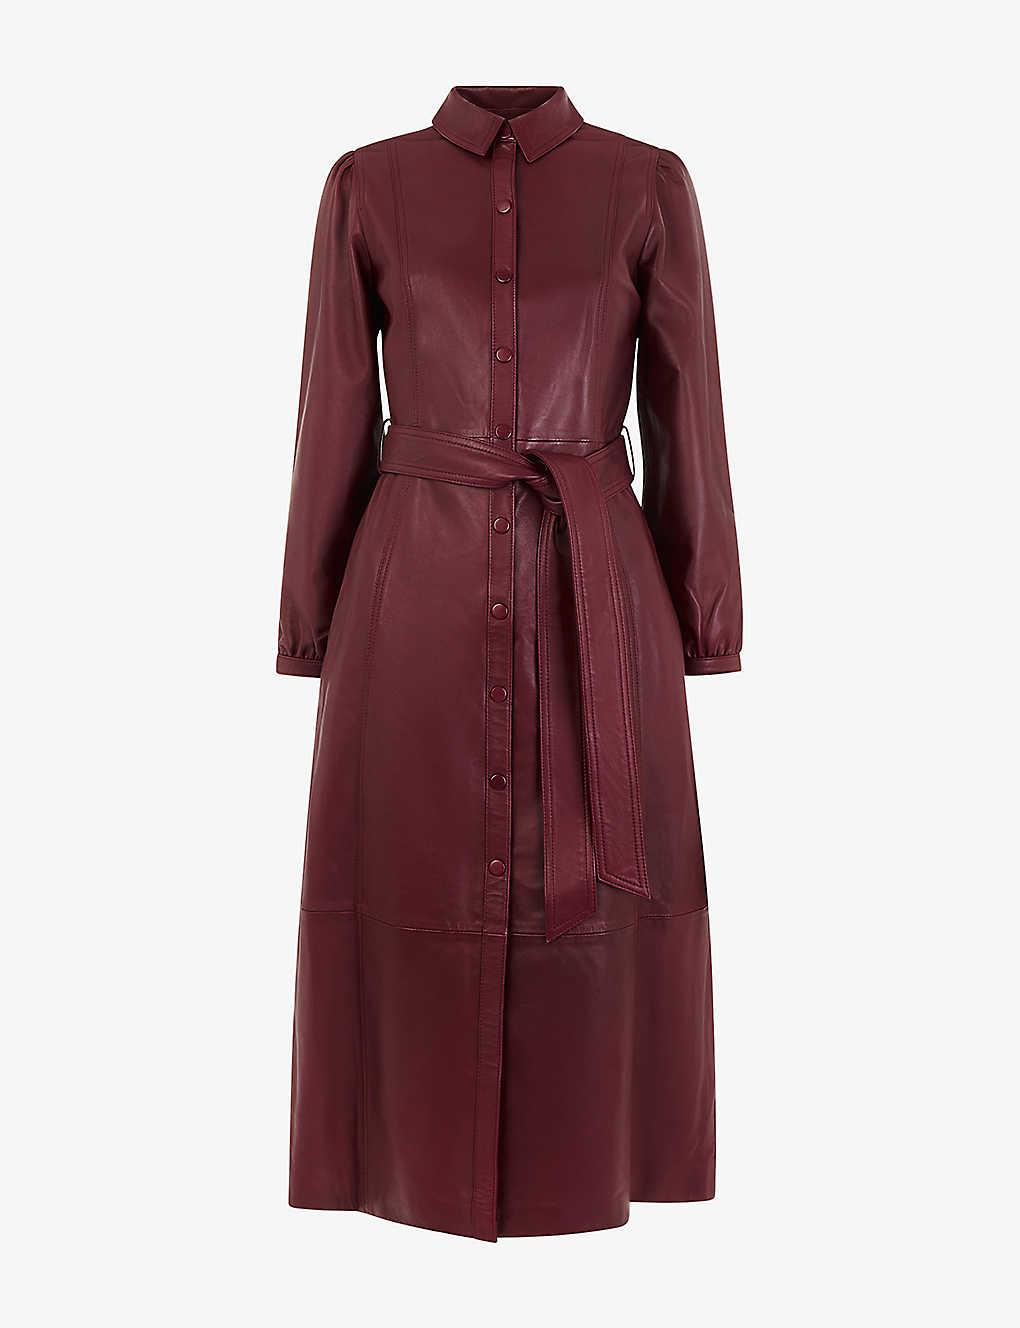 Whistles Phoebe Belted Leather Midi Dress In Plum/claret